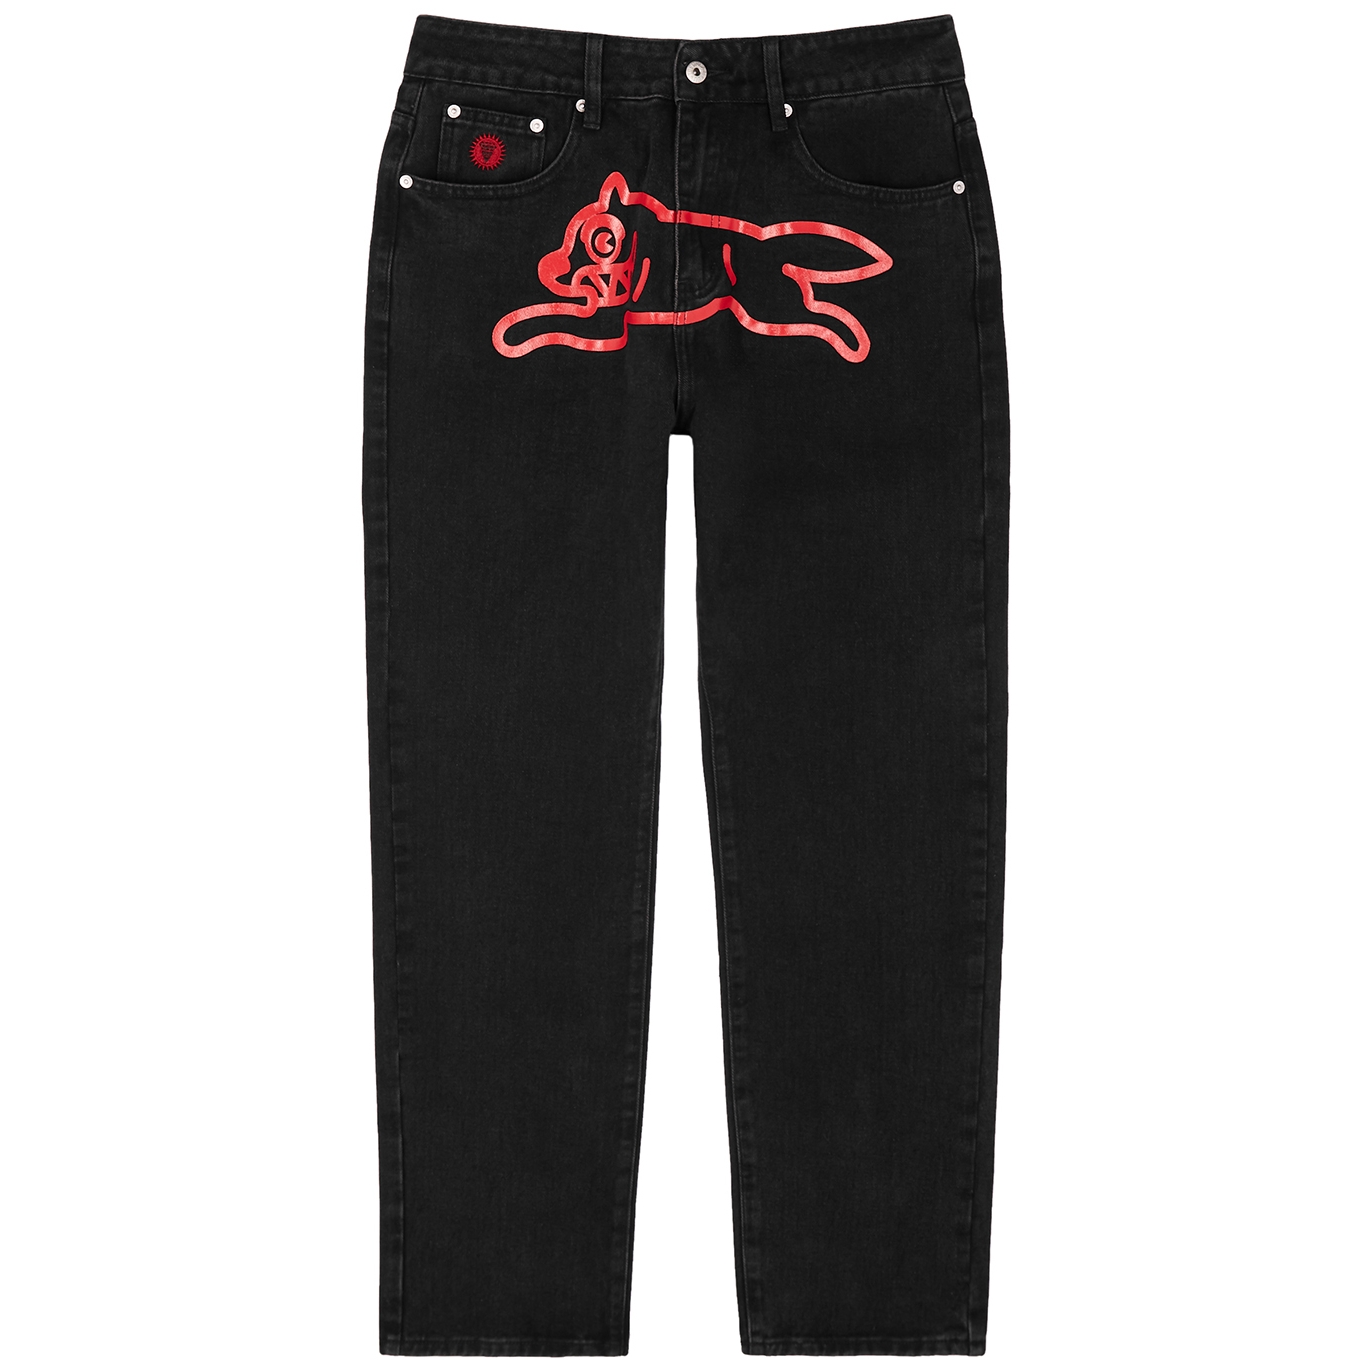 Black And Red Jeans